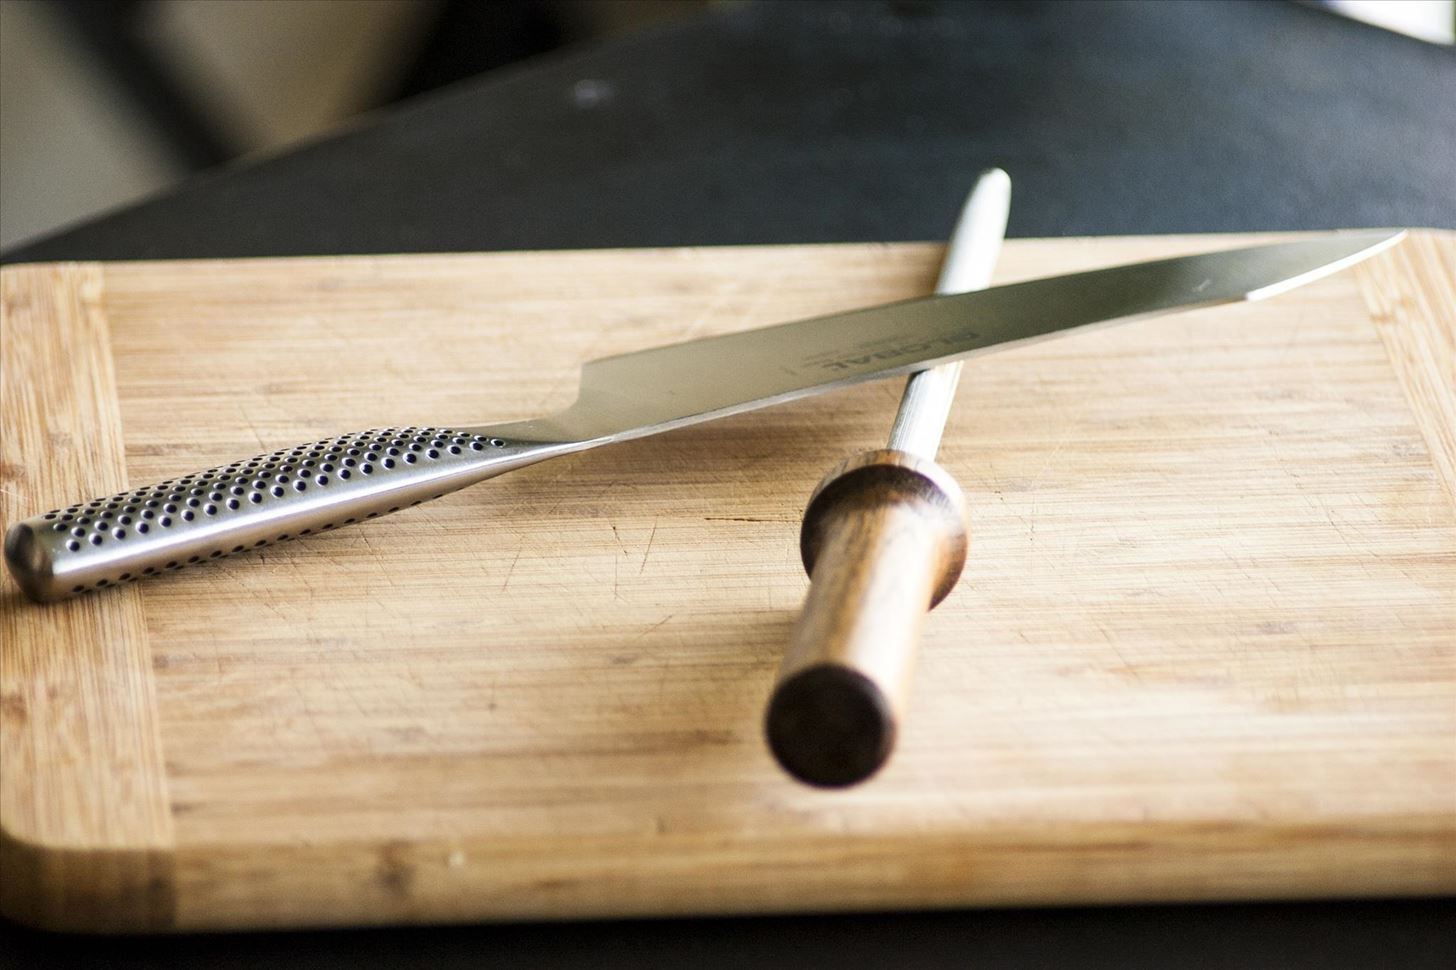 Knives 101: How to Care for Your Knives Like a Pro